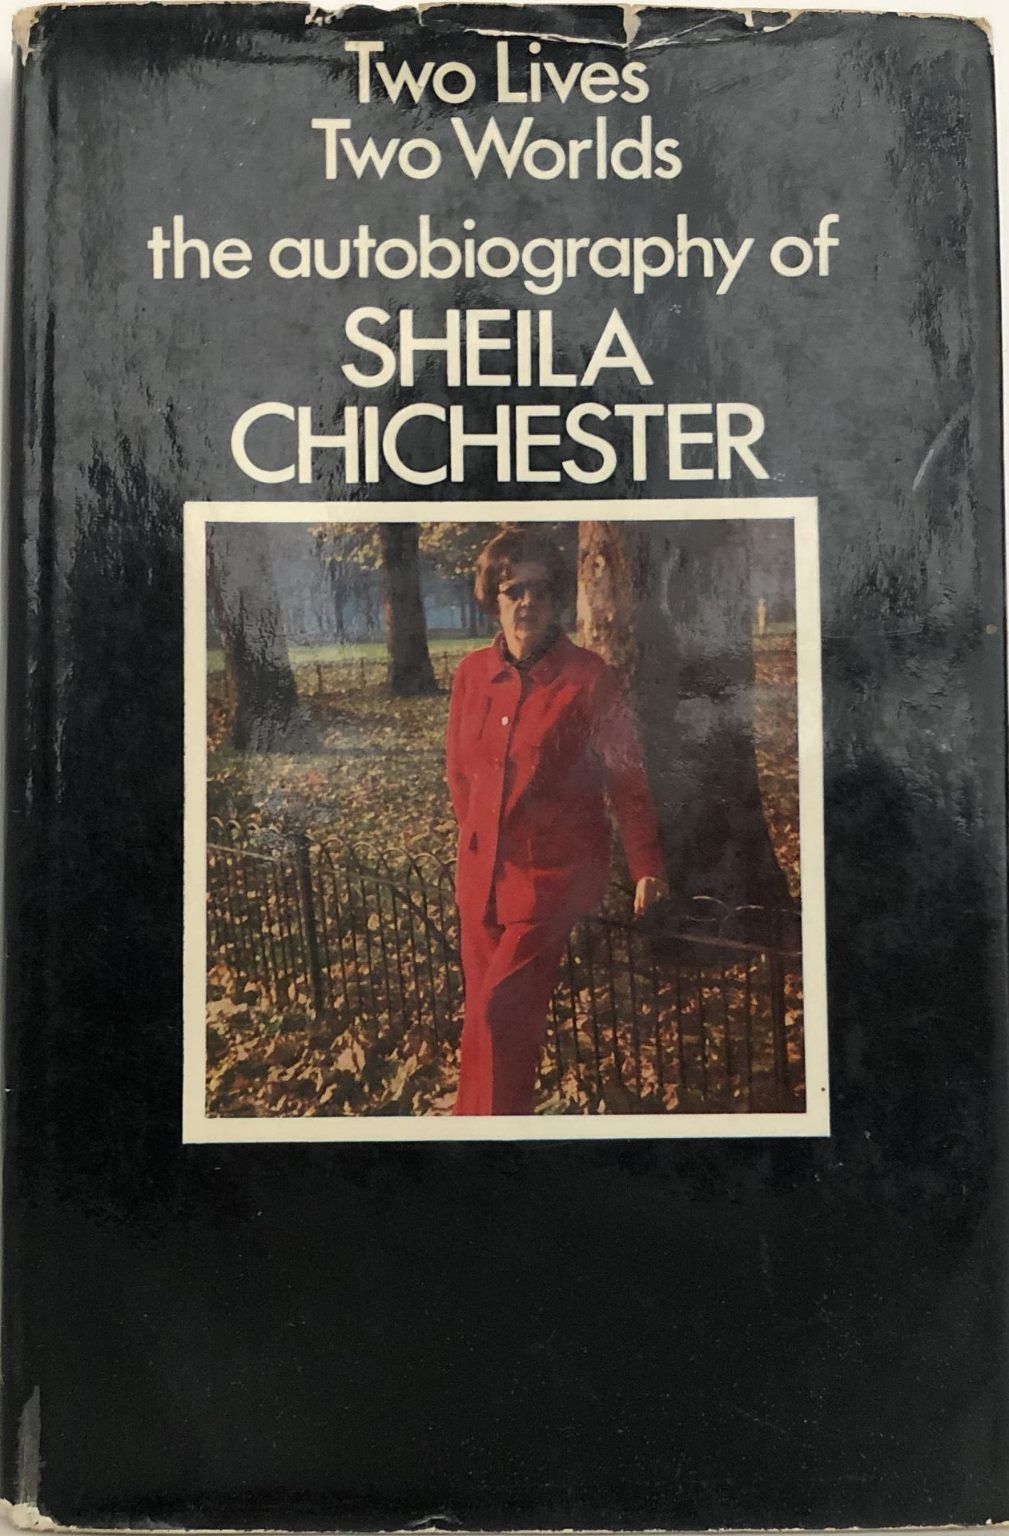 SHELIA CHICHESTER: Two Lives, Two Worlds - An Autobiography